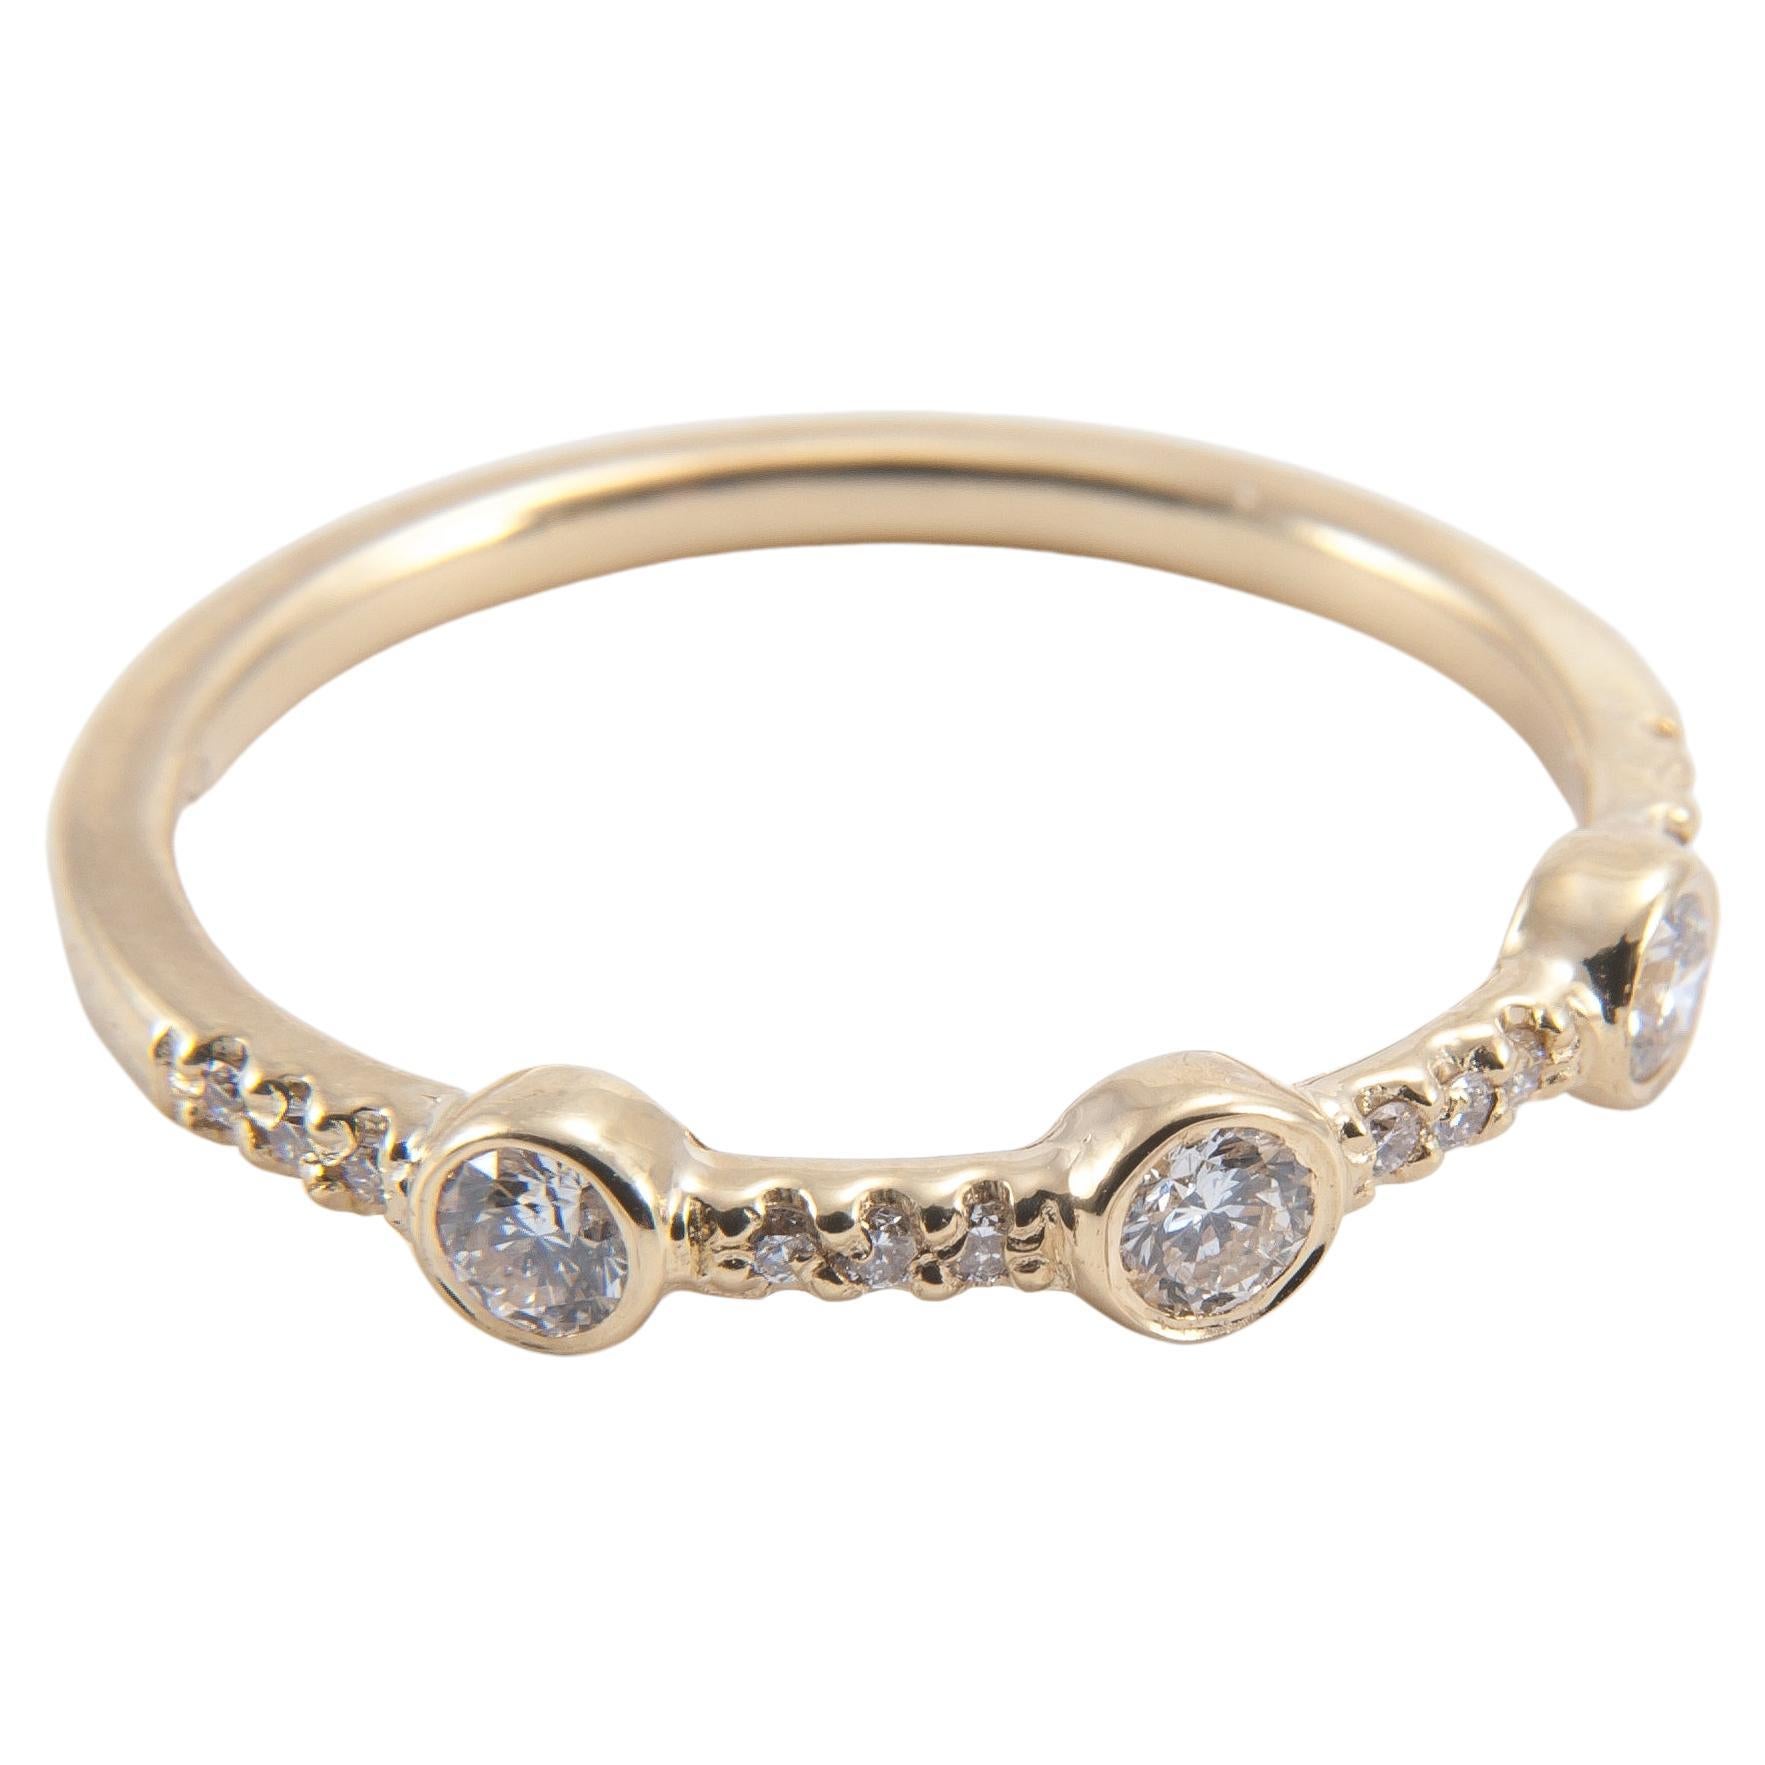 This classic pave-set diamond band is punctuated by three brilliant cut white diamonds. Wear alone or stack with our other gem set rings.

18K yellow gold band featuring three bezel set 0.10” white diamonds between pave set white diamonds.